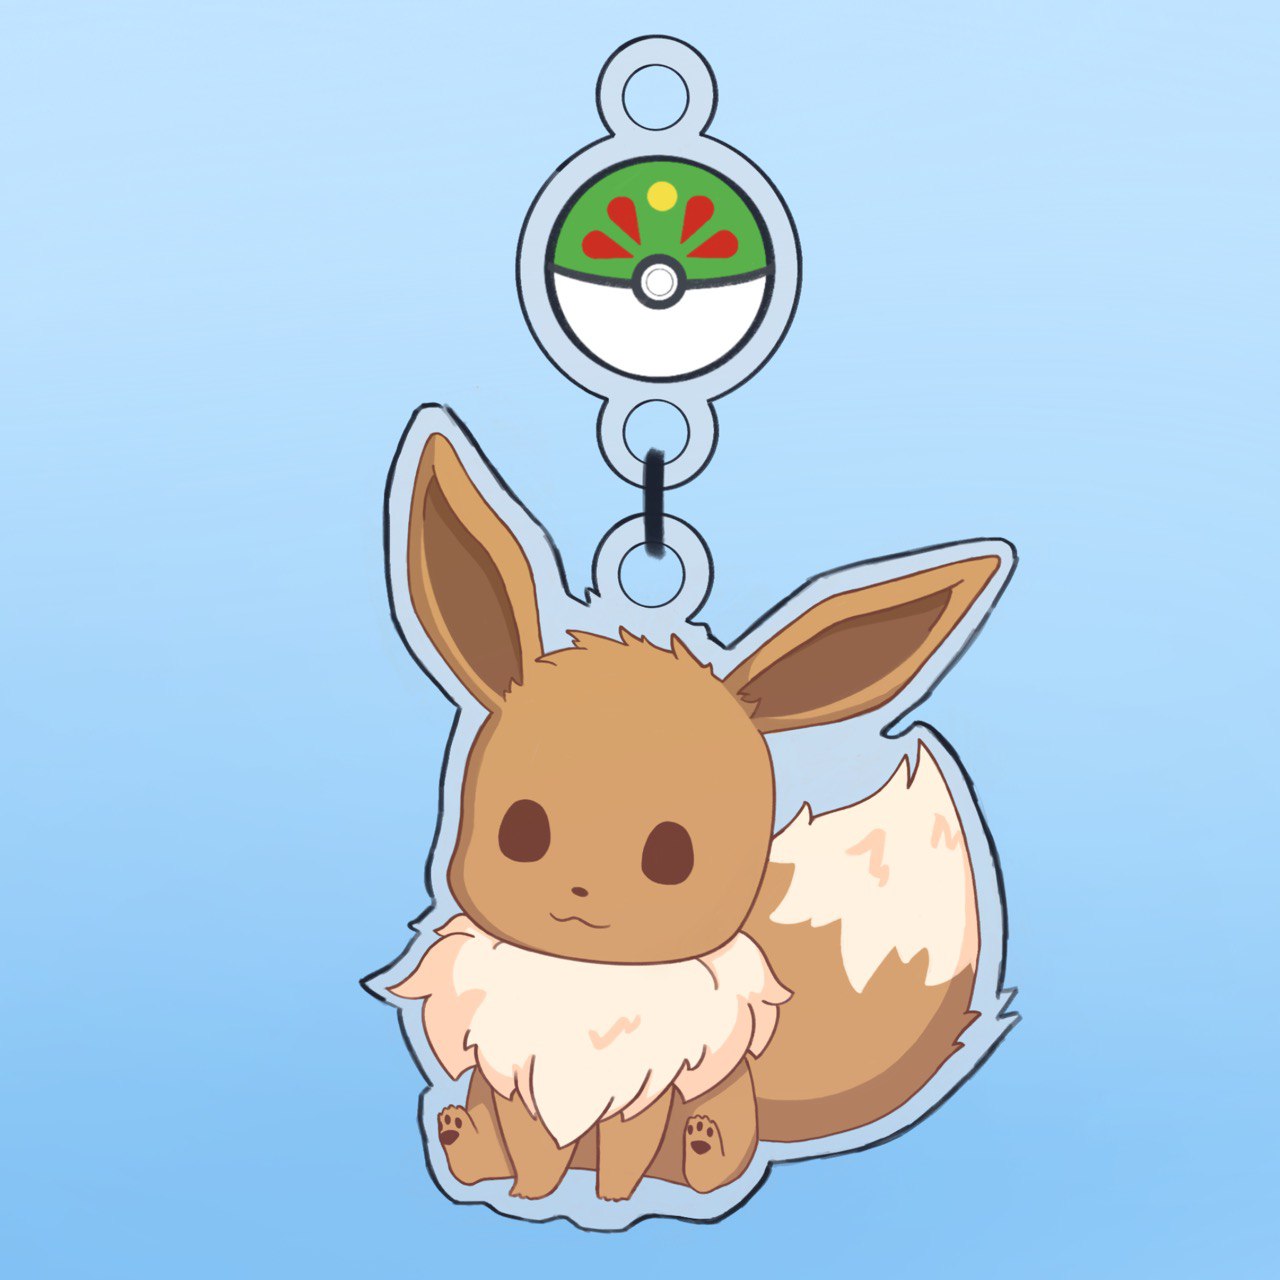 Finished Eevee with friend ball charm! 